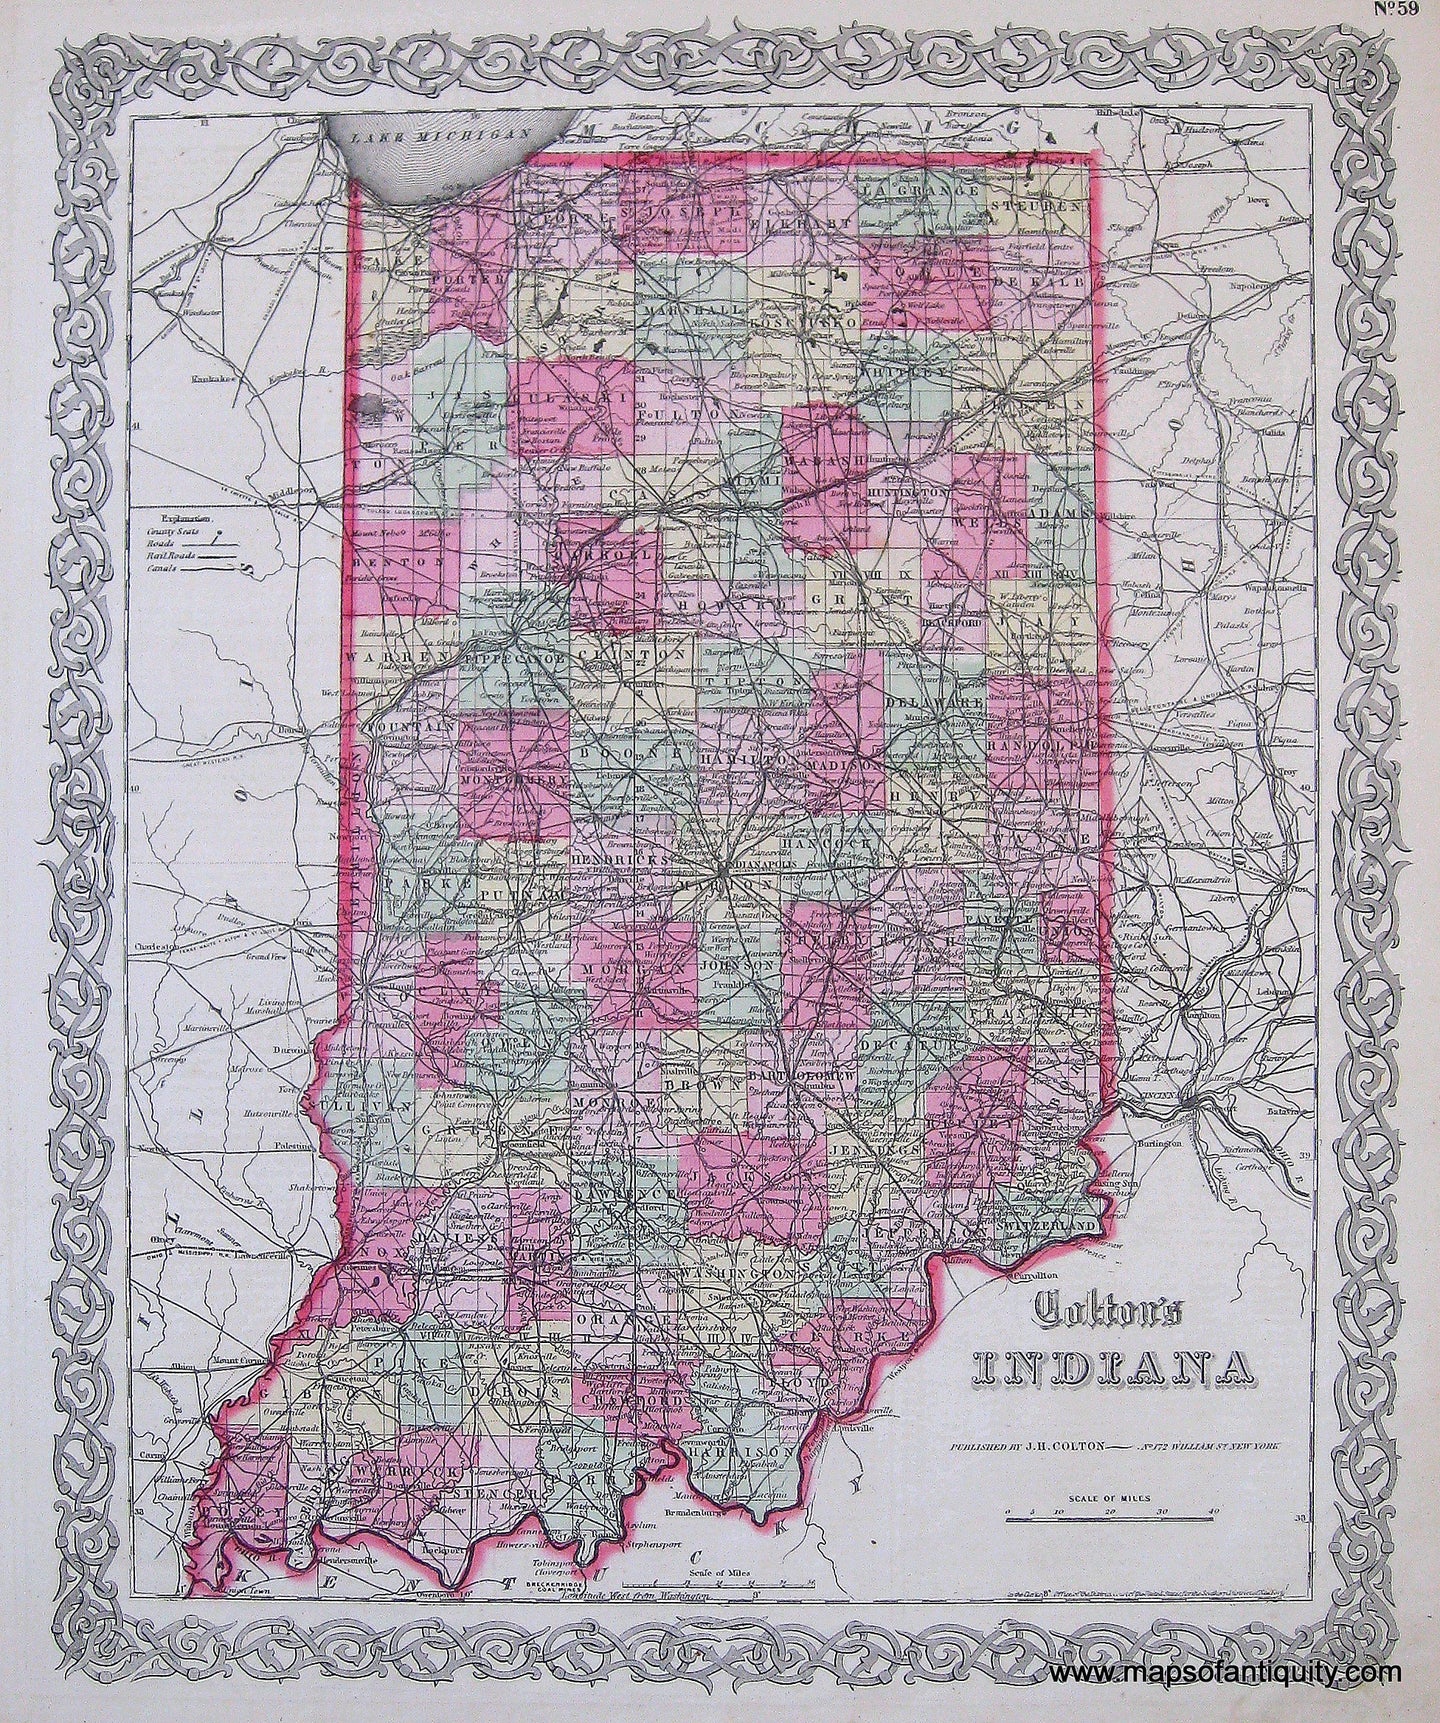 Antique-Hand-Colored-Map-Coltons-Indiana-1865-Colton-Maps-Of-Antiquity